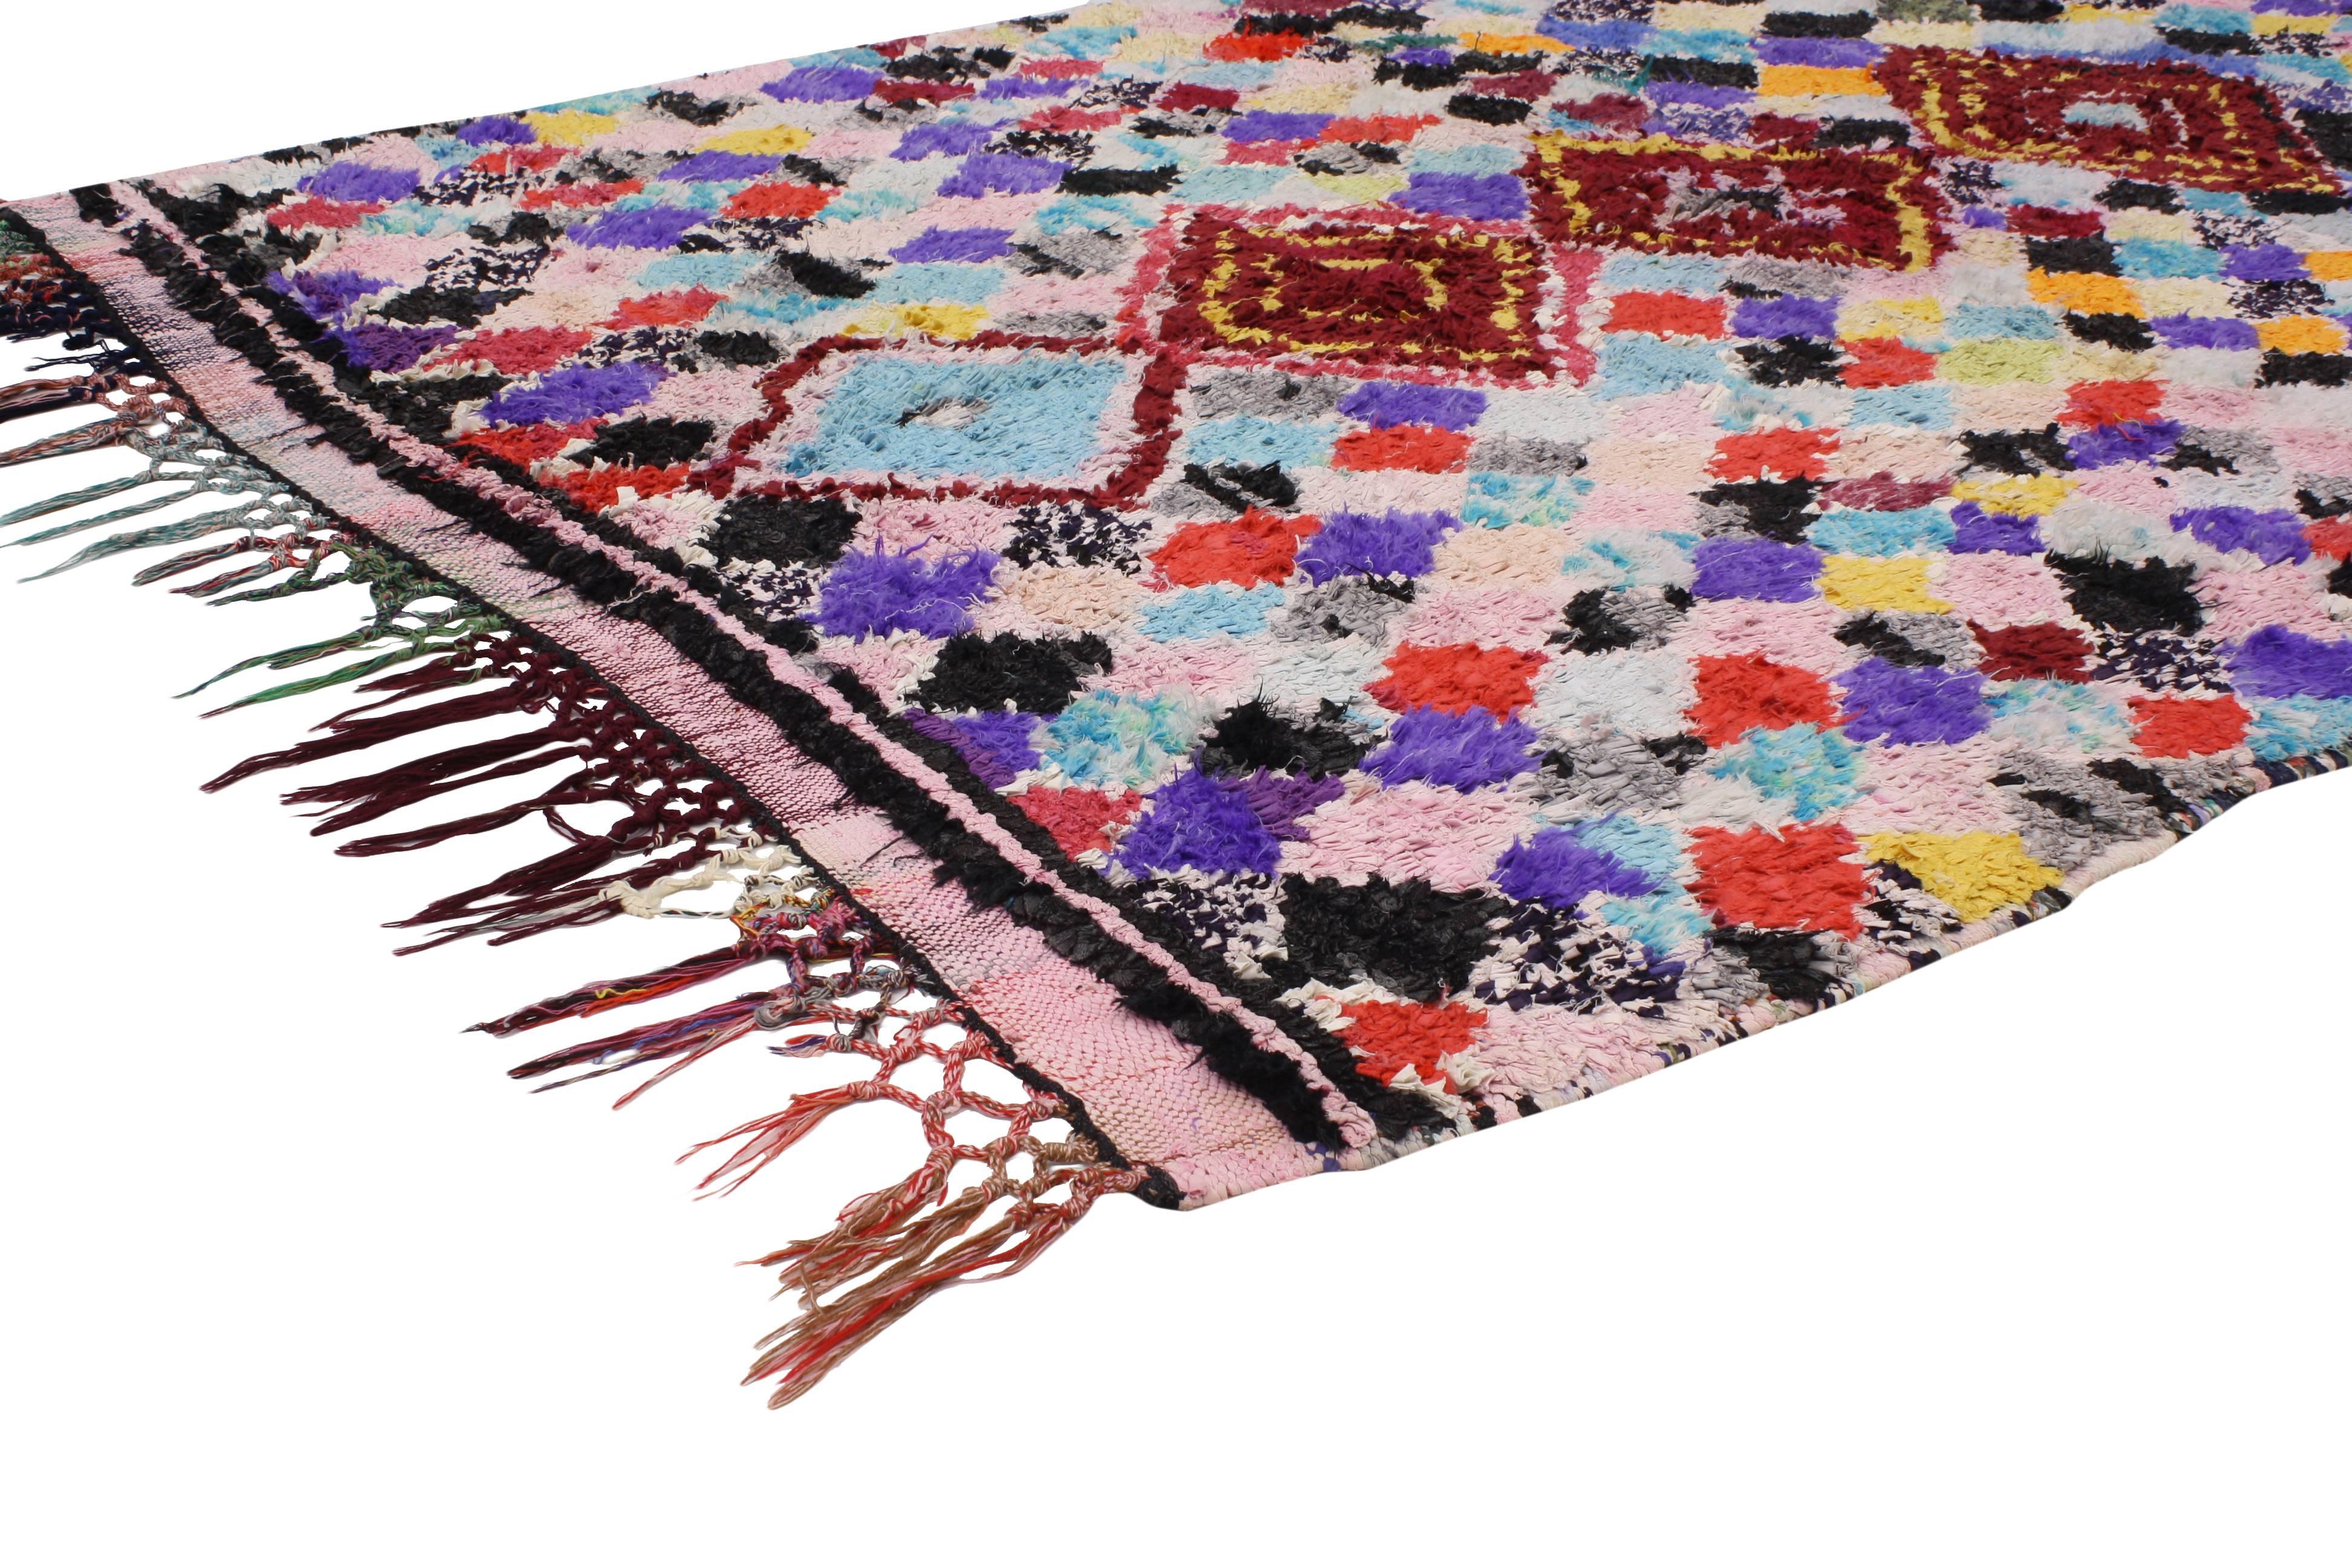 20404 Vintage Berber Moroccan Azilal Rug with Boho Chic Tribal Style. From the Azilal region of the High Atlas Mountains of Morocco, this vintage Berber Moroccan rug features boho chic tribal style. Highlighting a bold all-over diamond design